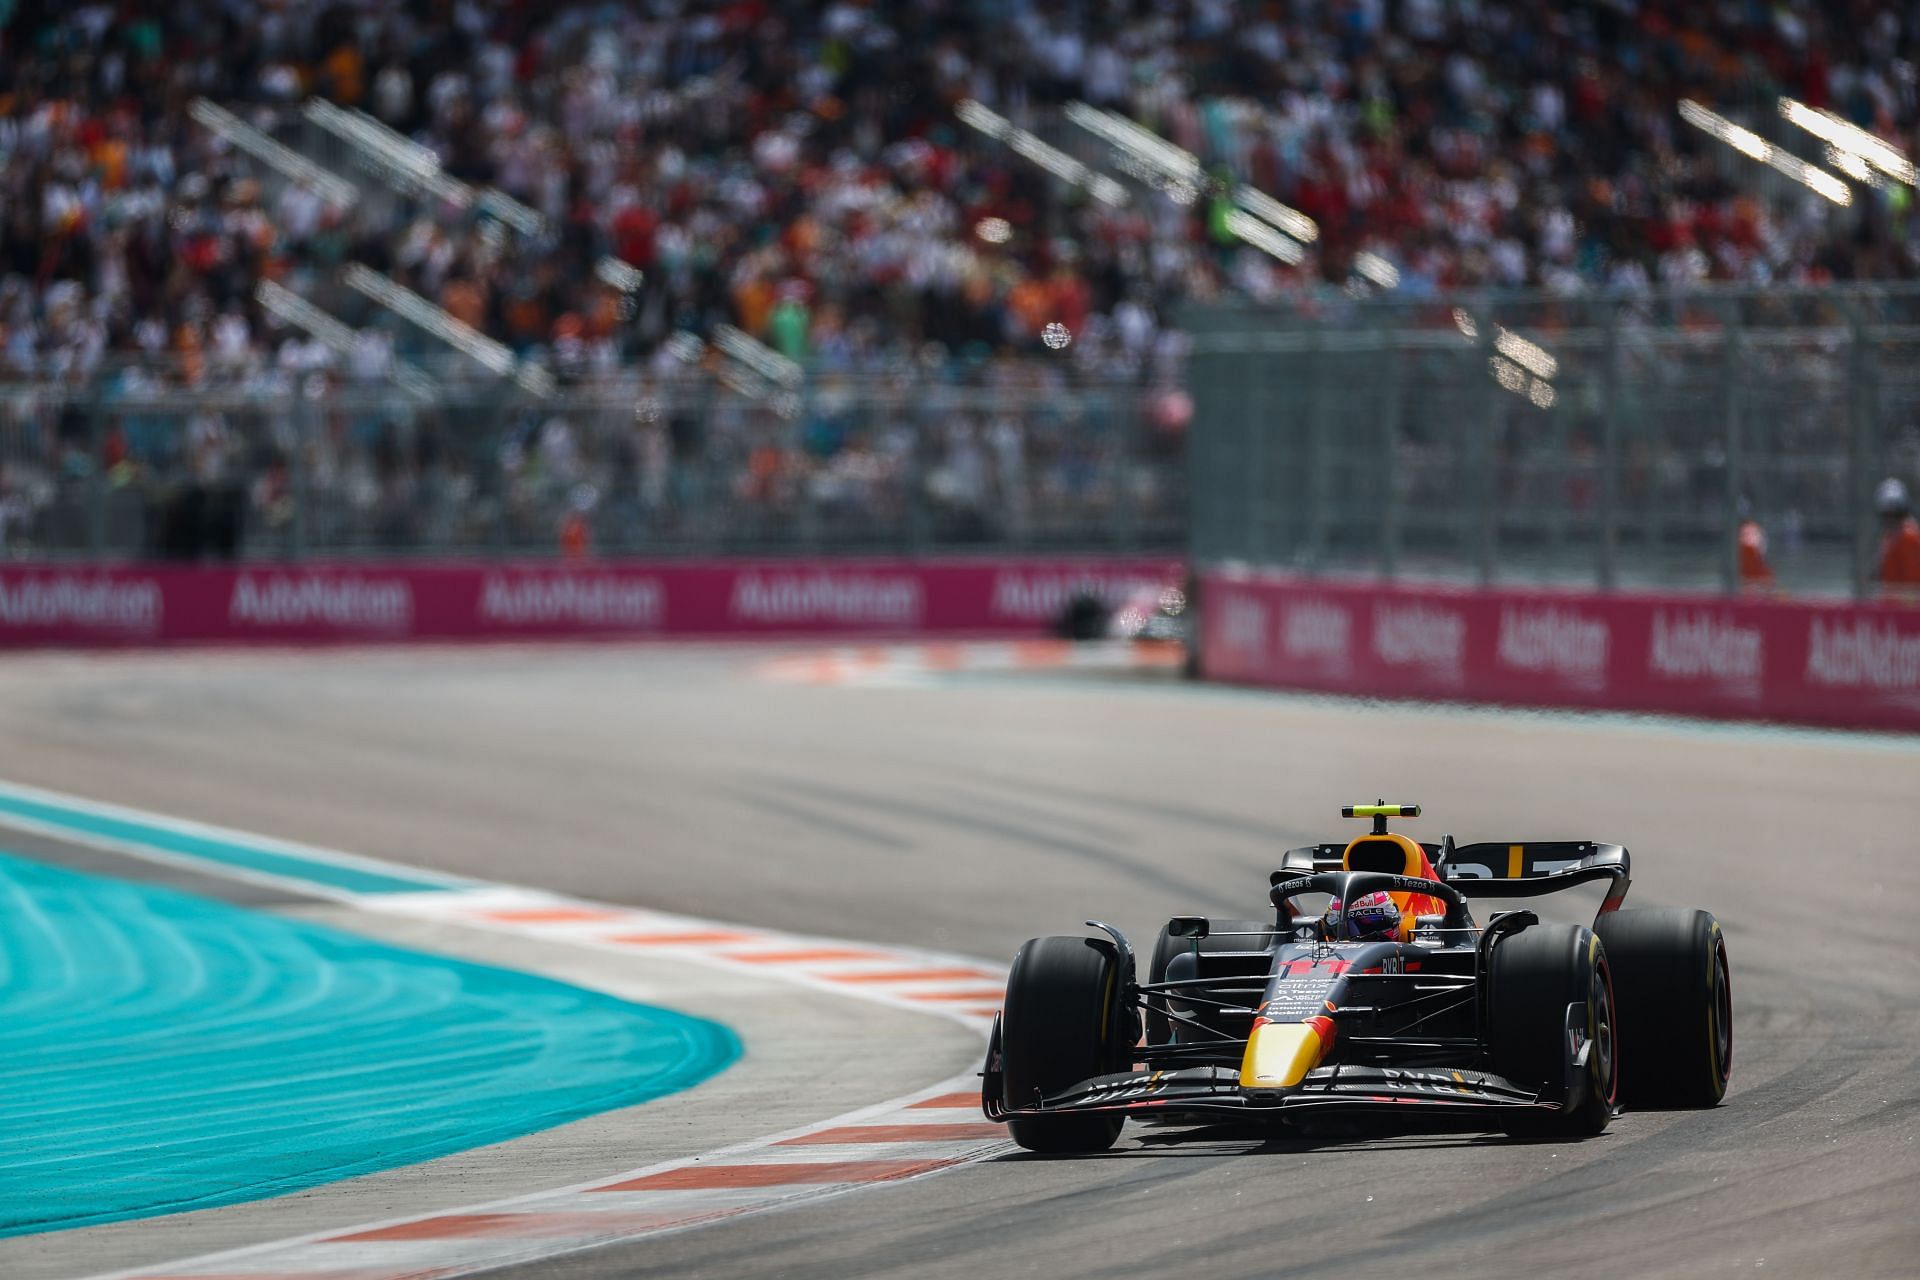 Miami GP was a one-off race in North America before the entire paddock came to Europe